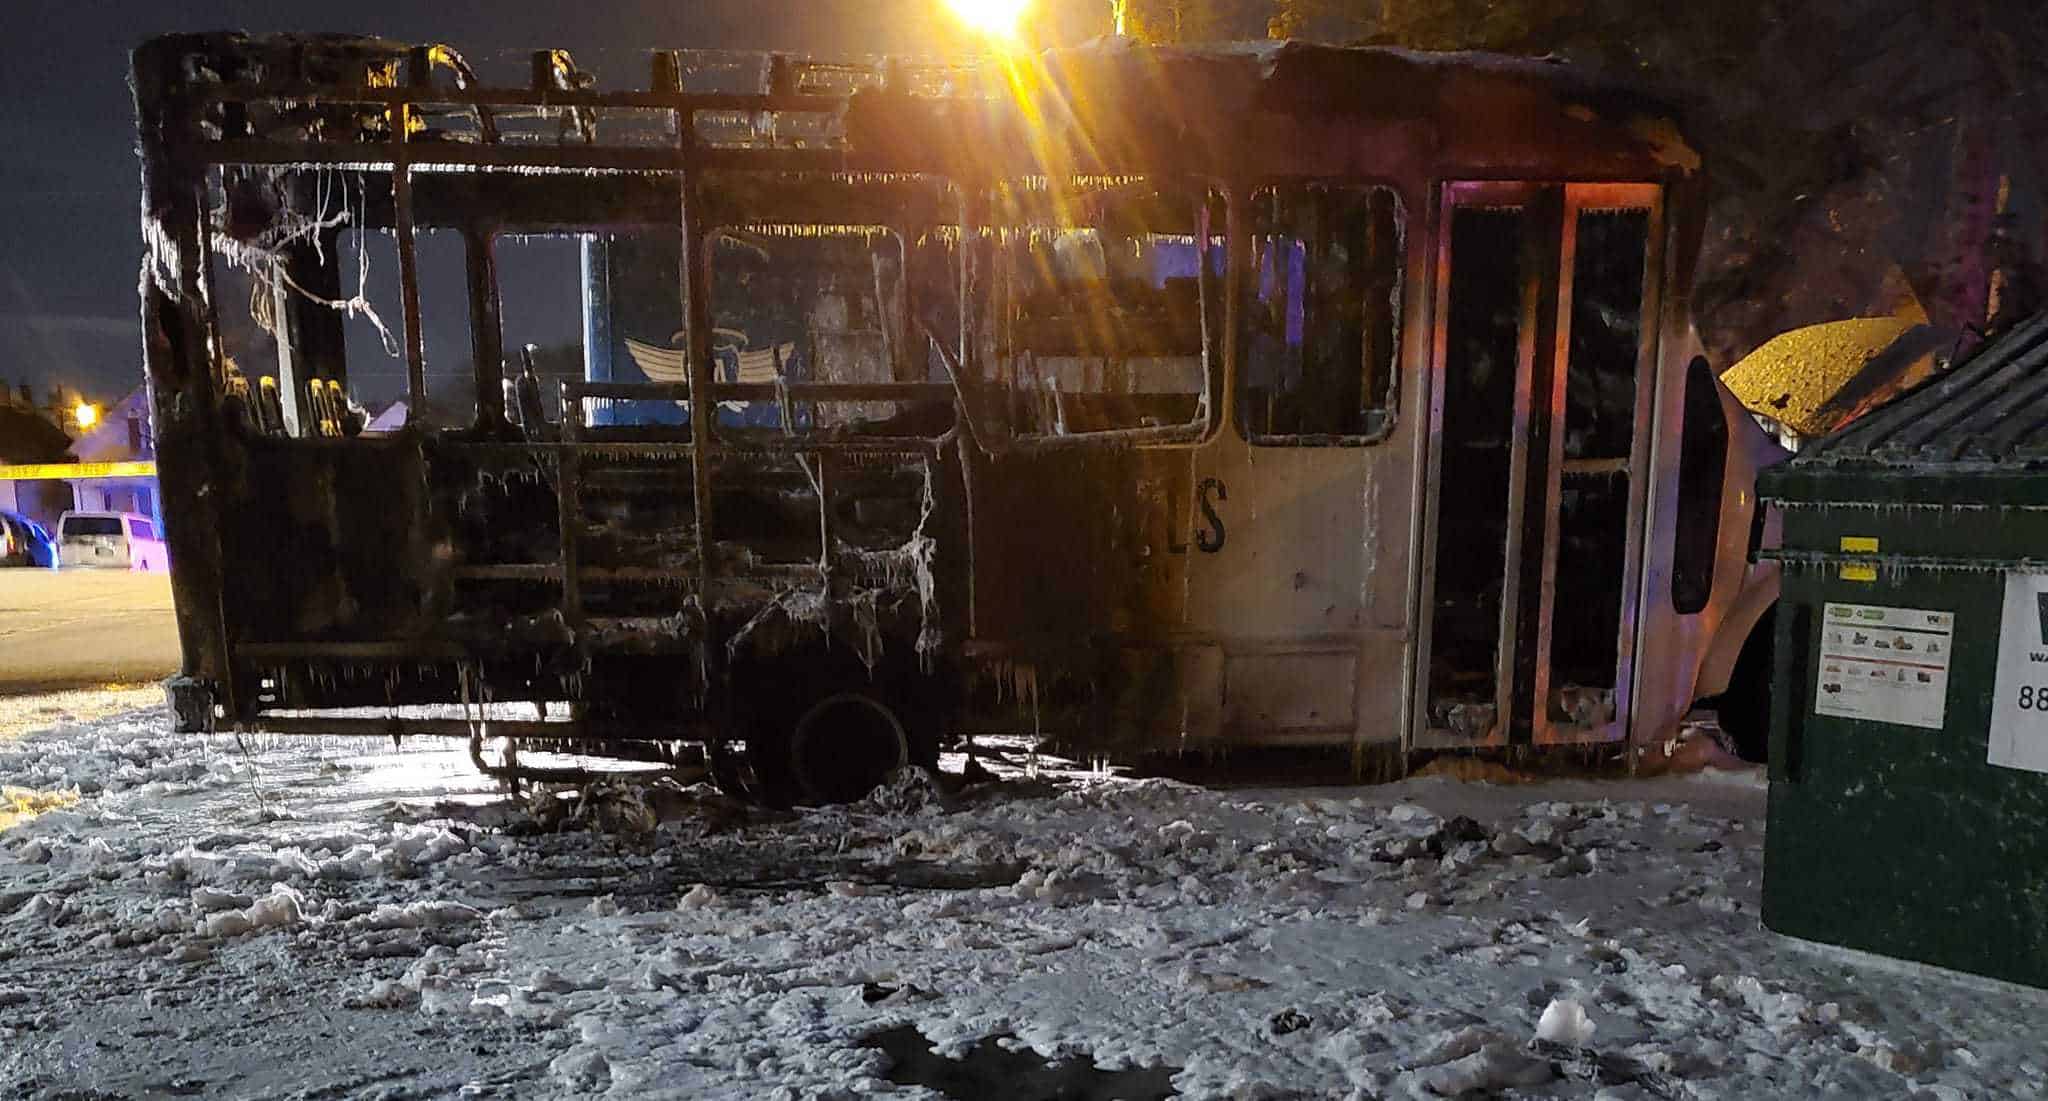 Street Angels Buses Torched